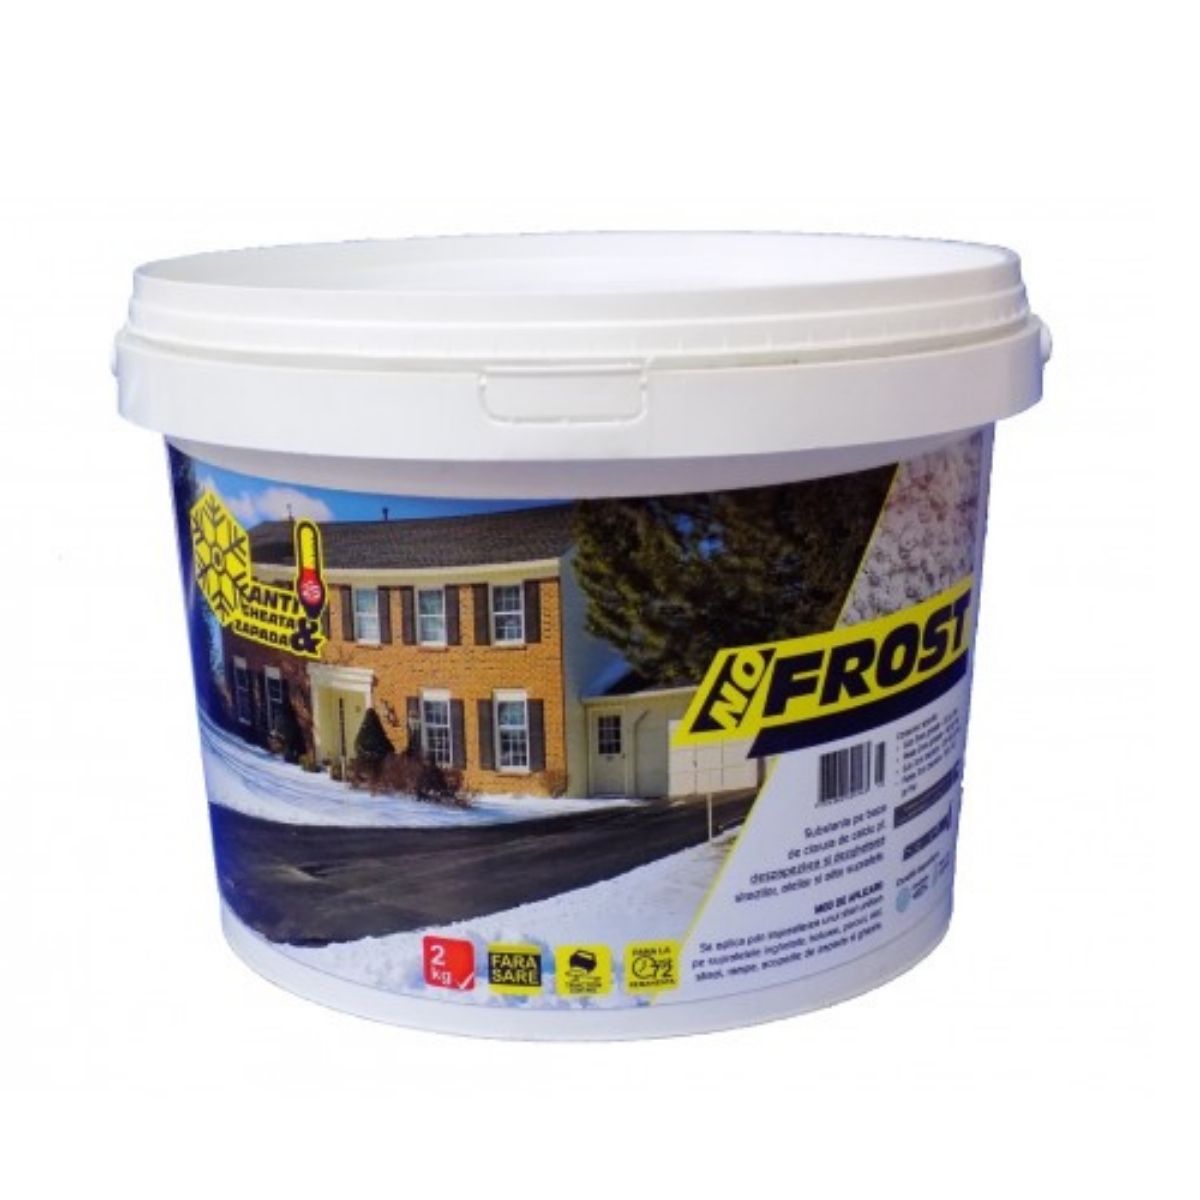 Accesorii exterior - Deszapezire ecologica NO-FROST 4 KG ,Pestmaster, hectarul.ro